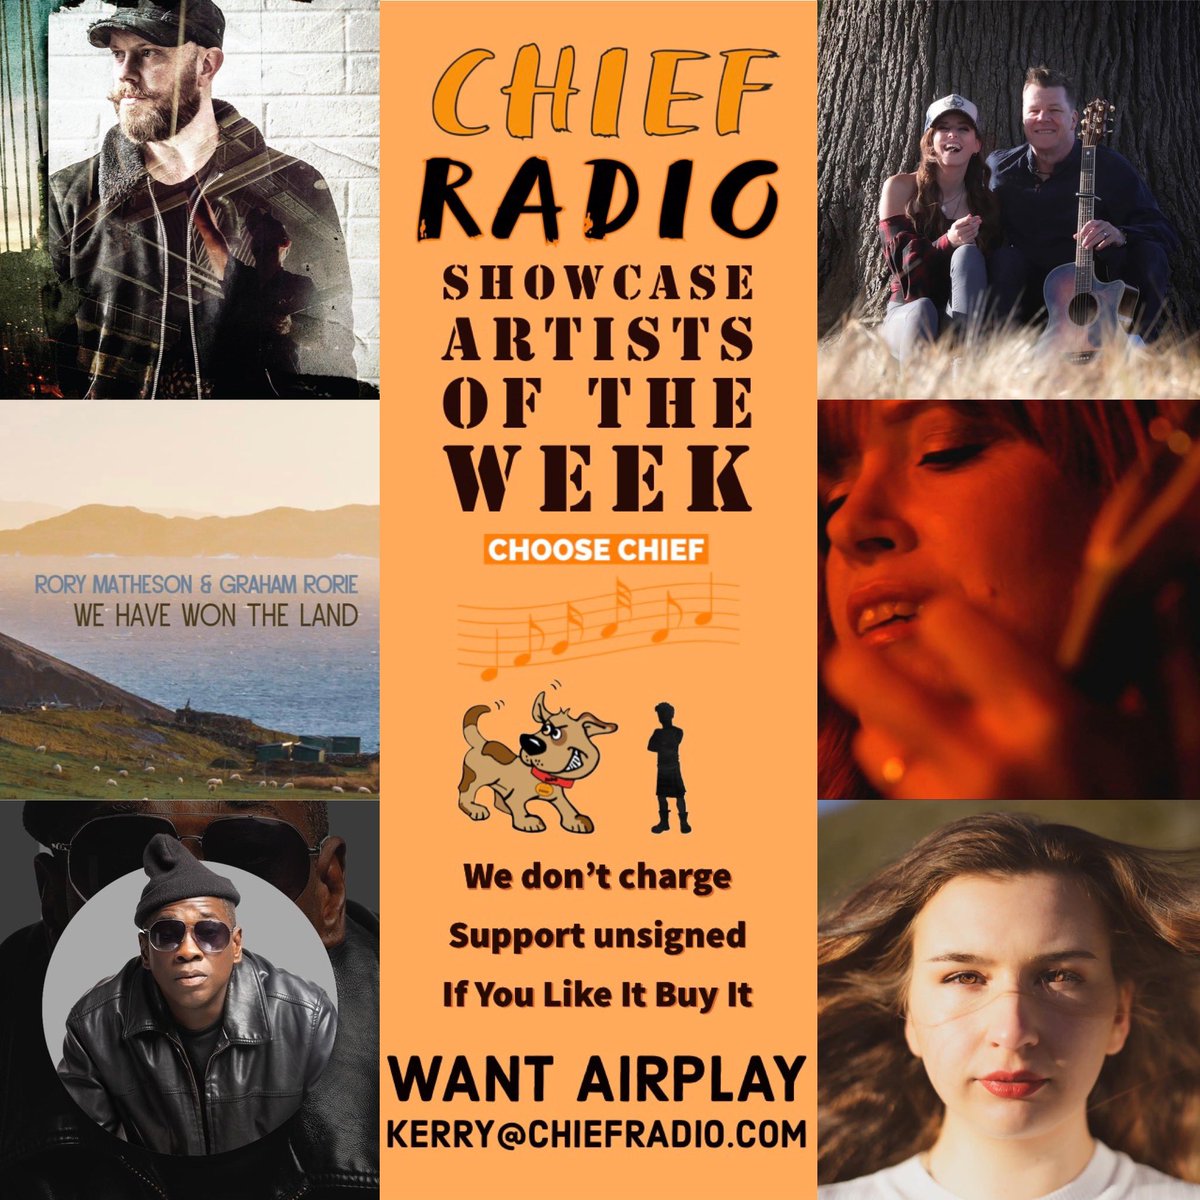 Our showcase artists this week are

@ryansounds 
@AdeleAndAndy 
#abigailpryde
@ryte_eye 
@sarahmcquaid 
@graham_rorie & Rory Matheson

Give these artists a follow and #ifyoulikeitbuyit

#unsigned or #independentartist? Send your mp3 -@Kerry_Thomson1 kerry@chiefradio.com #newmusic